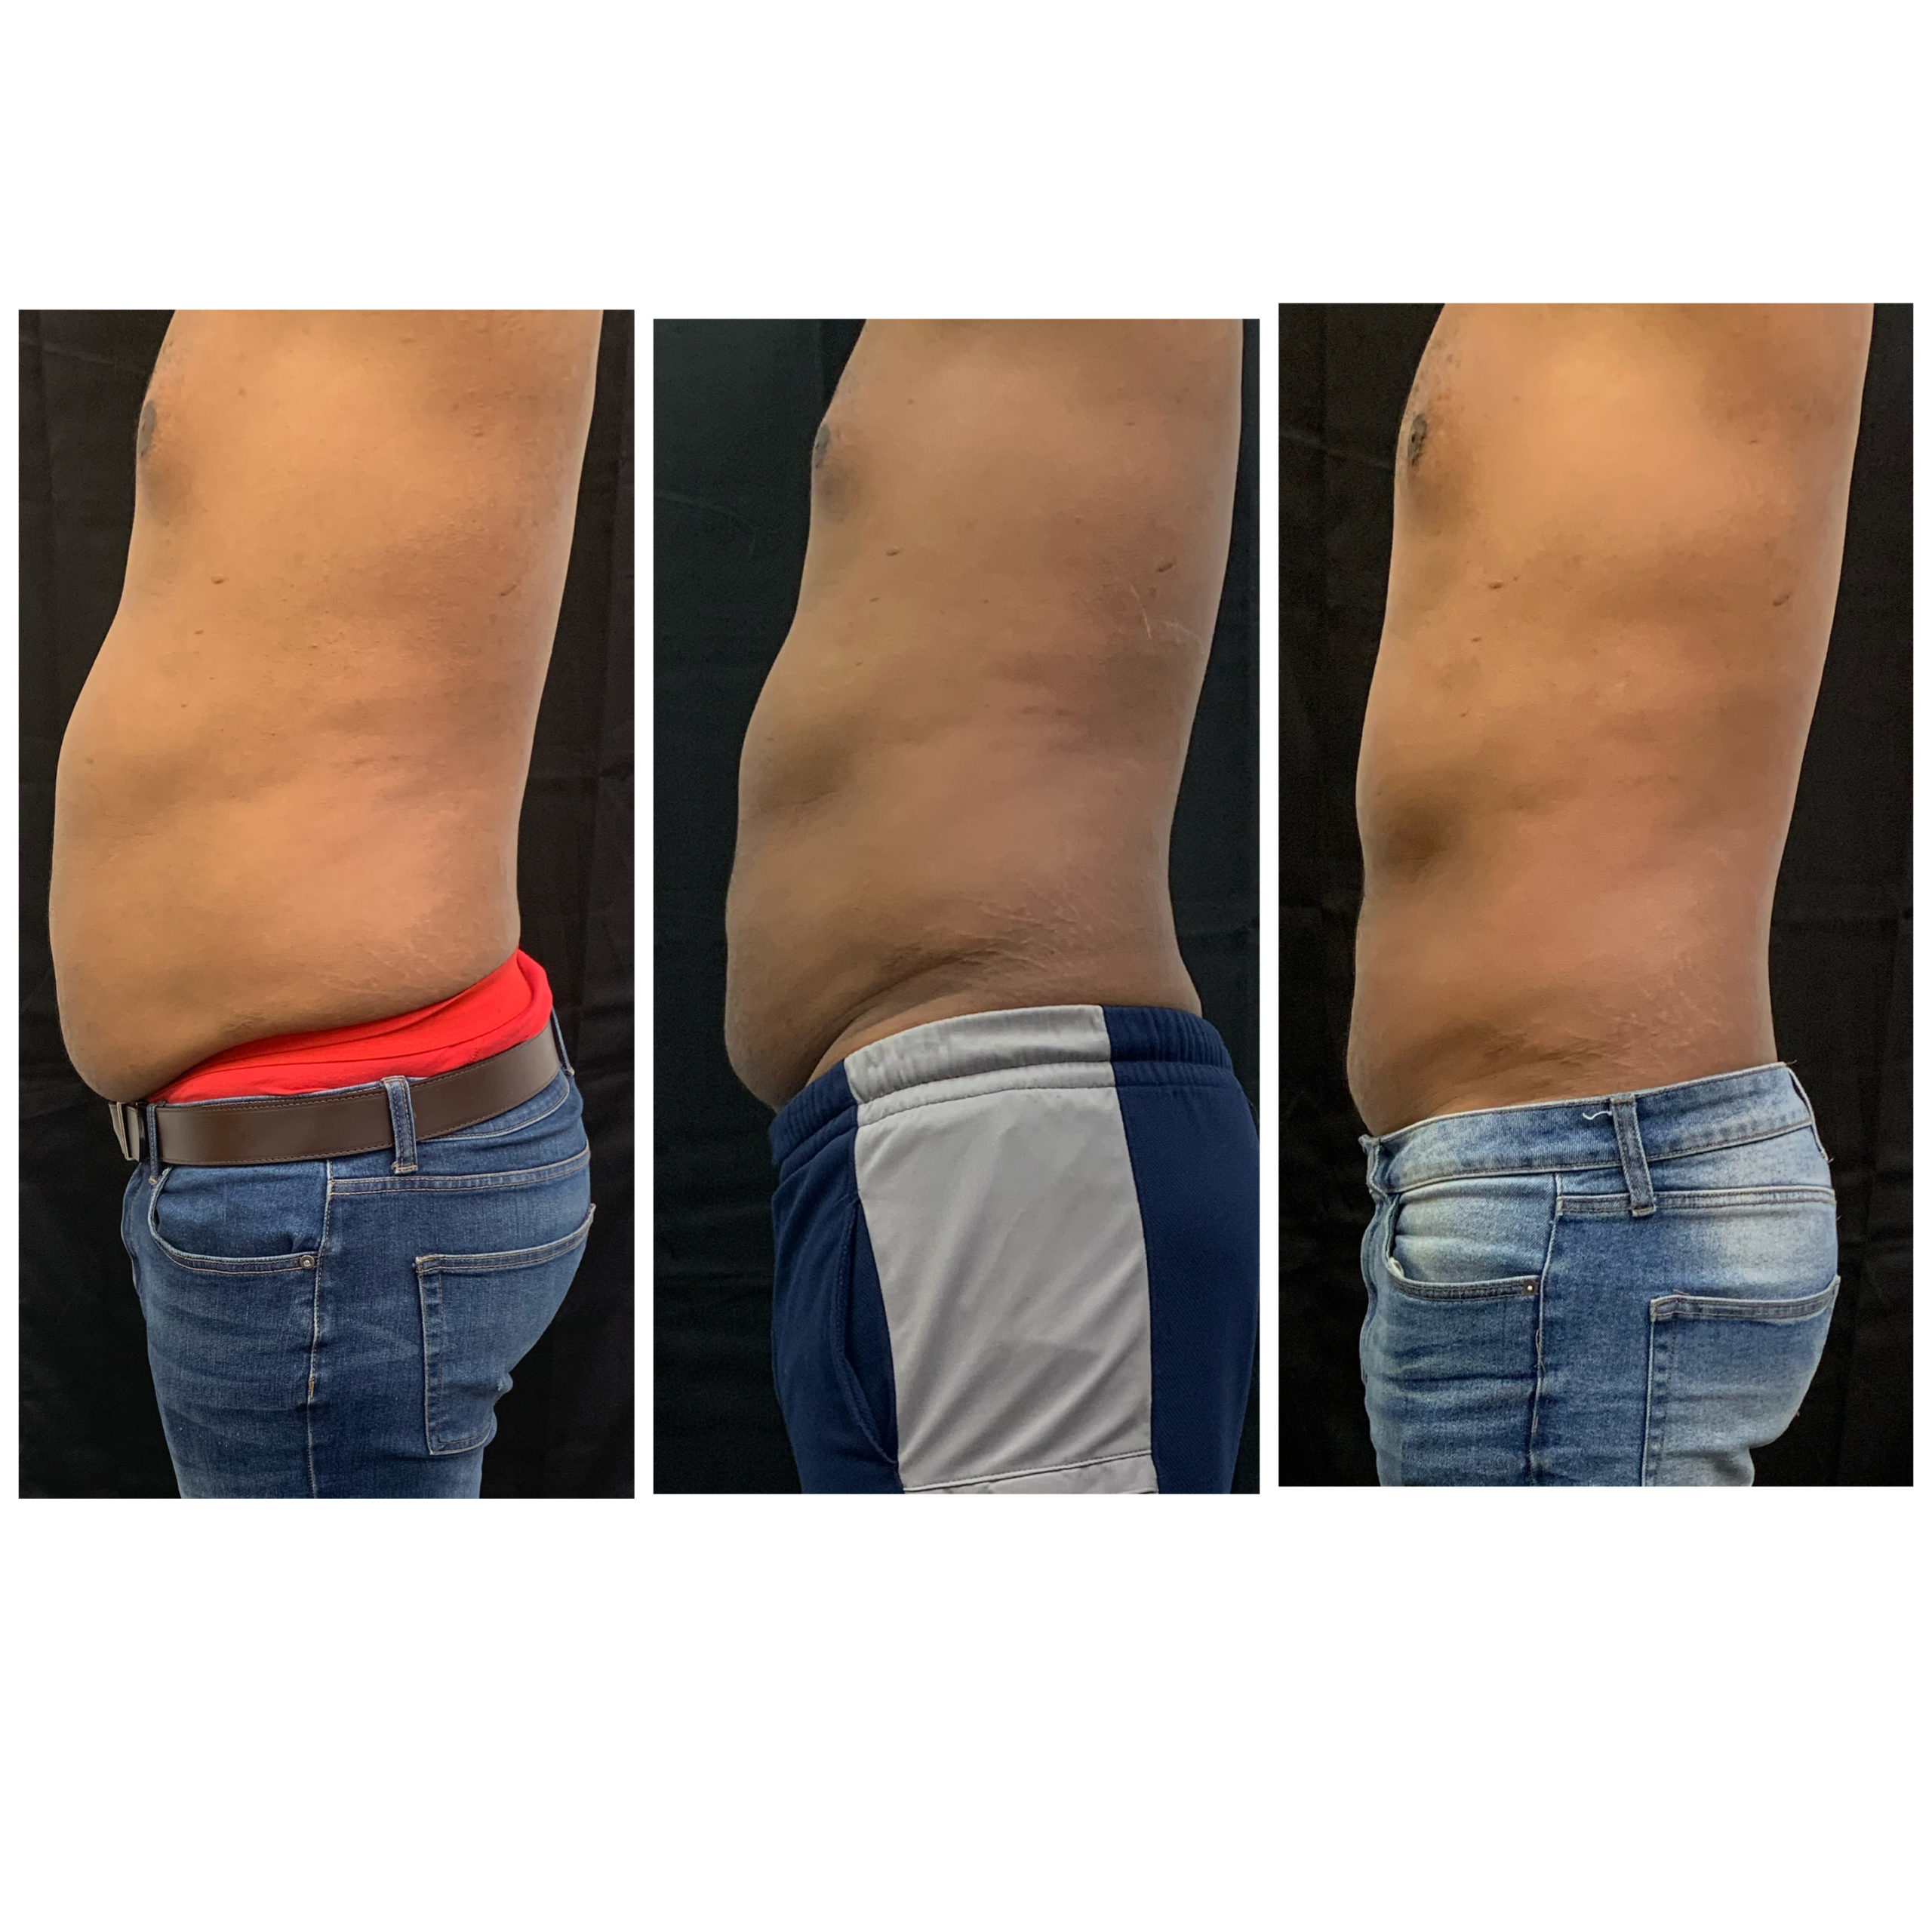 Radiofrequency Before & After Photos | The Better Body Shop MedSpa In Houston, TX